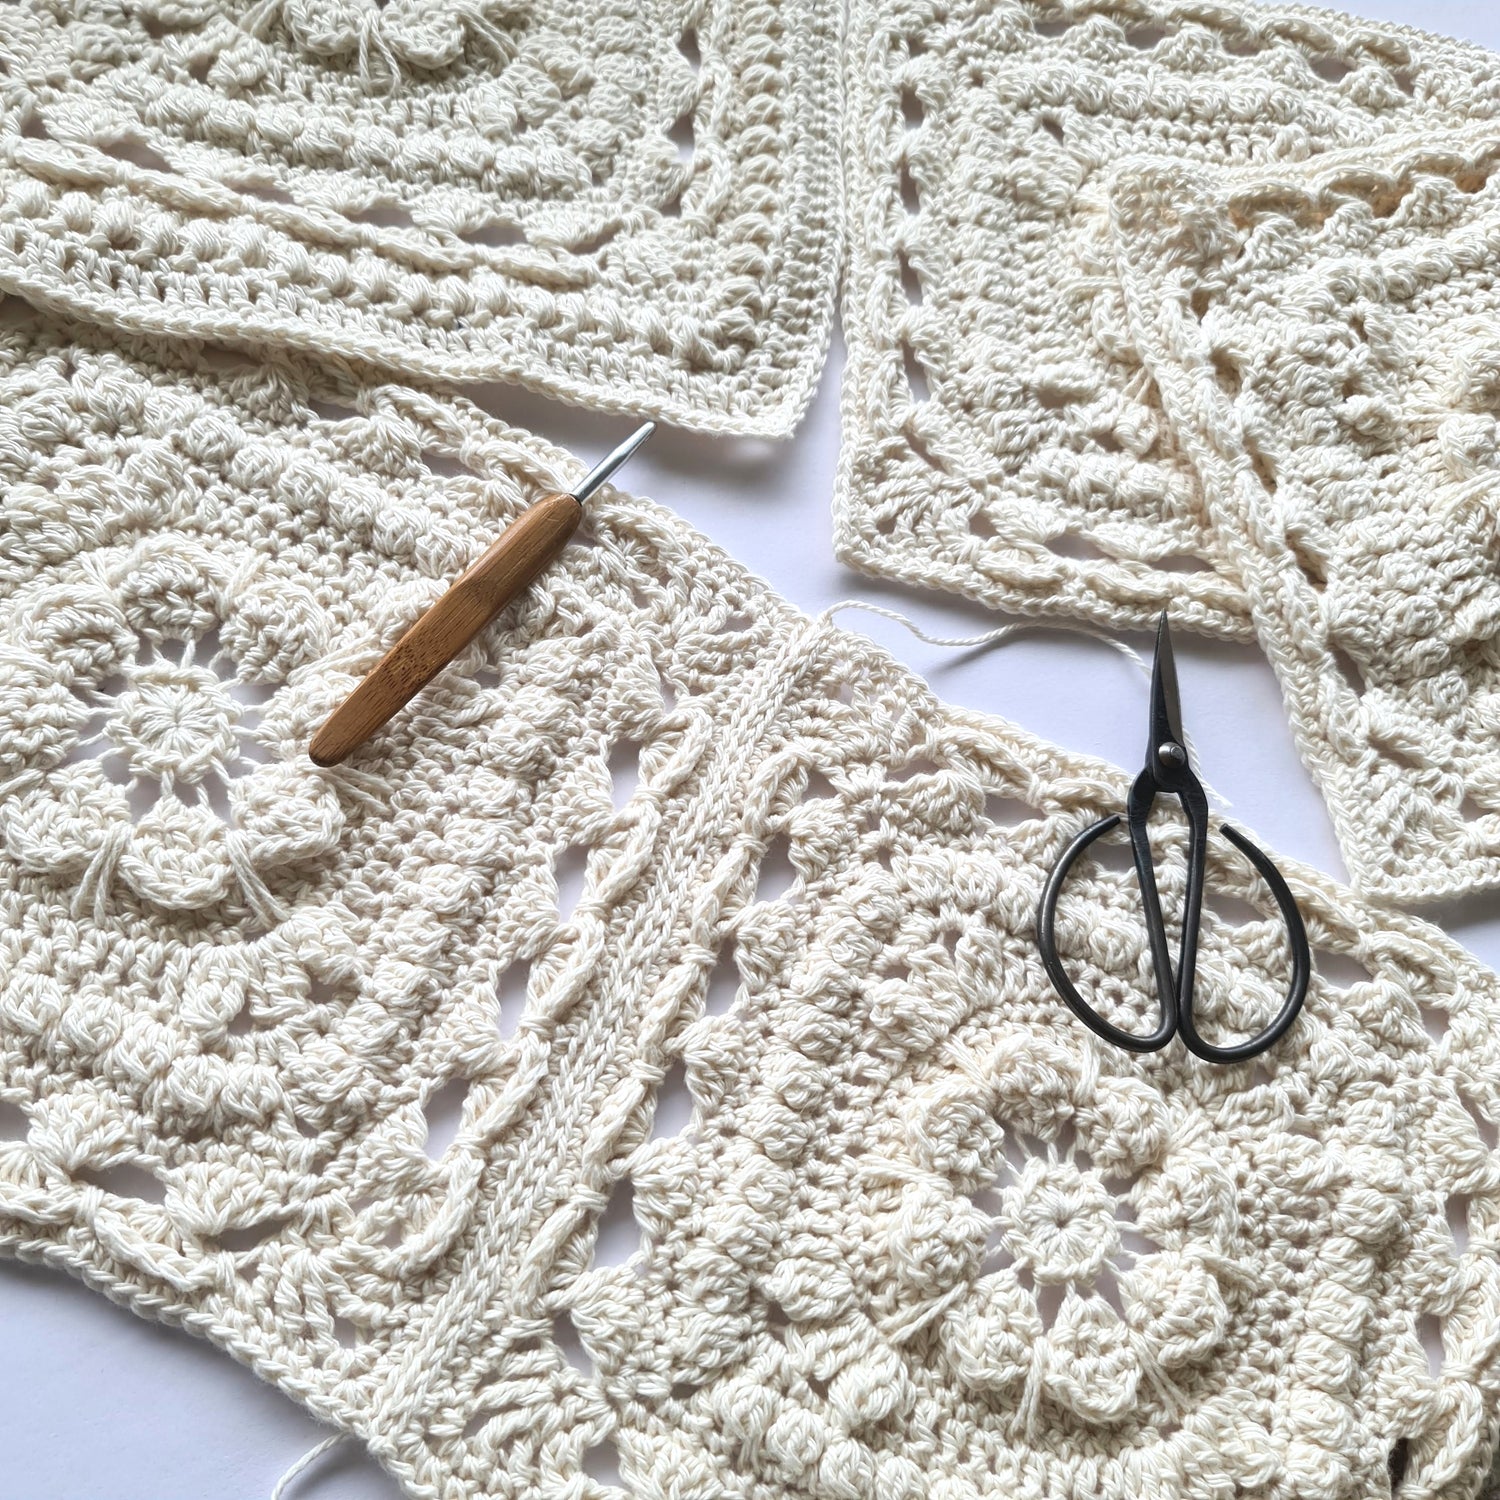 Cream single colour granny squares from Persnickety Blanket crochet pattern by Shelley Husband with a crochet hook and black yarn scissors